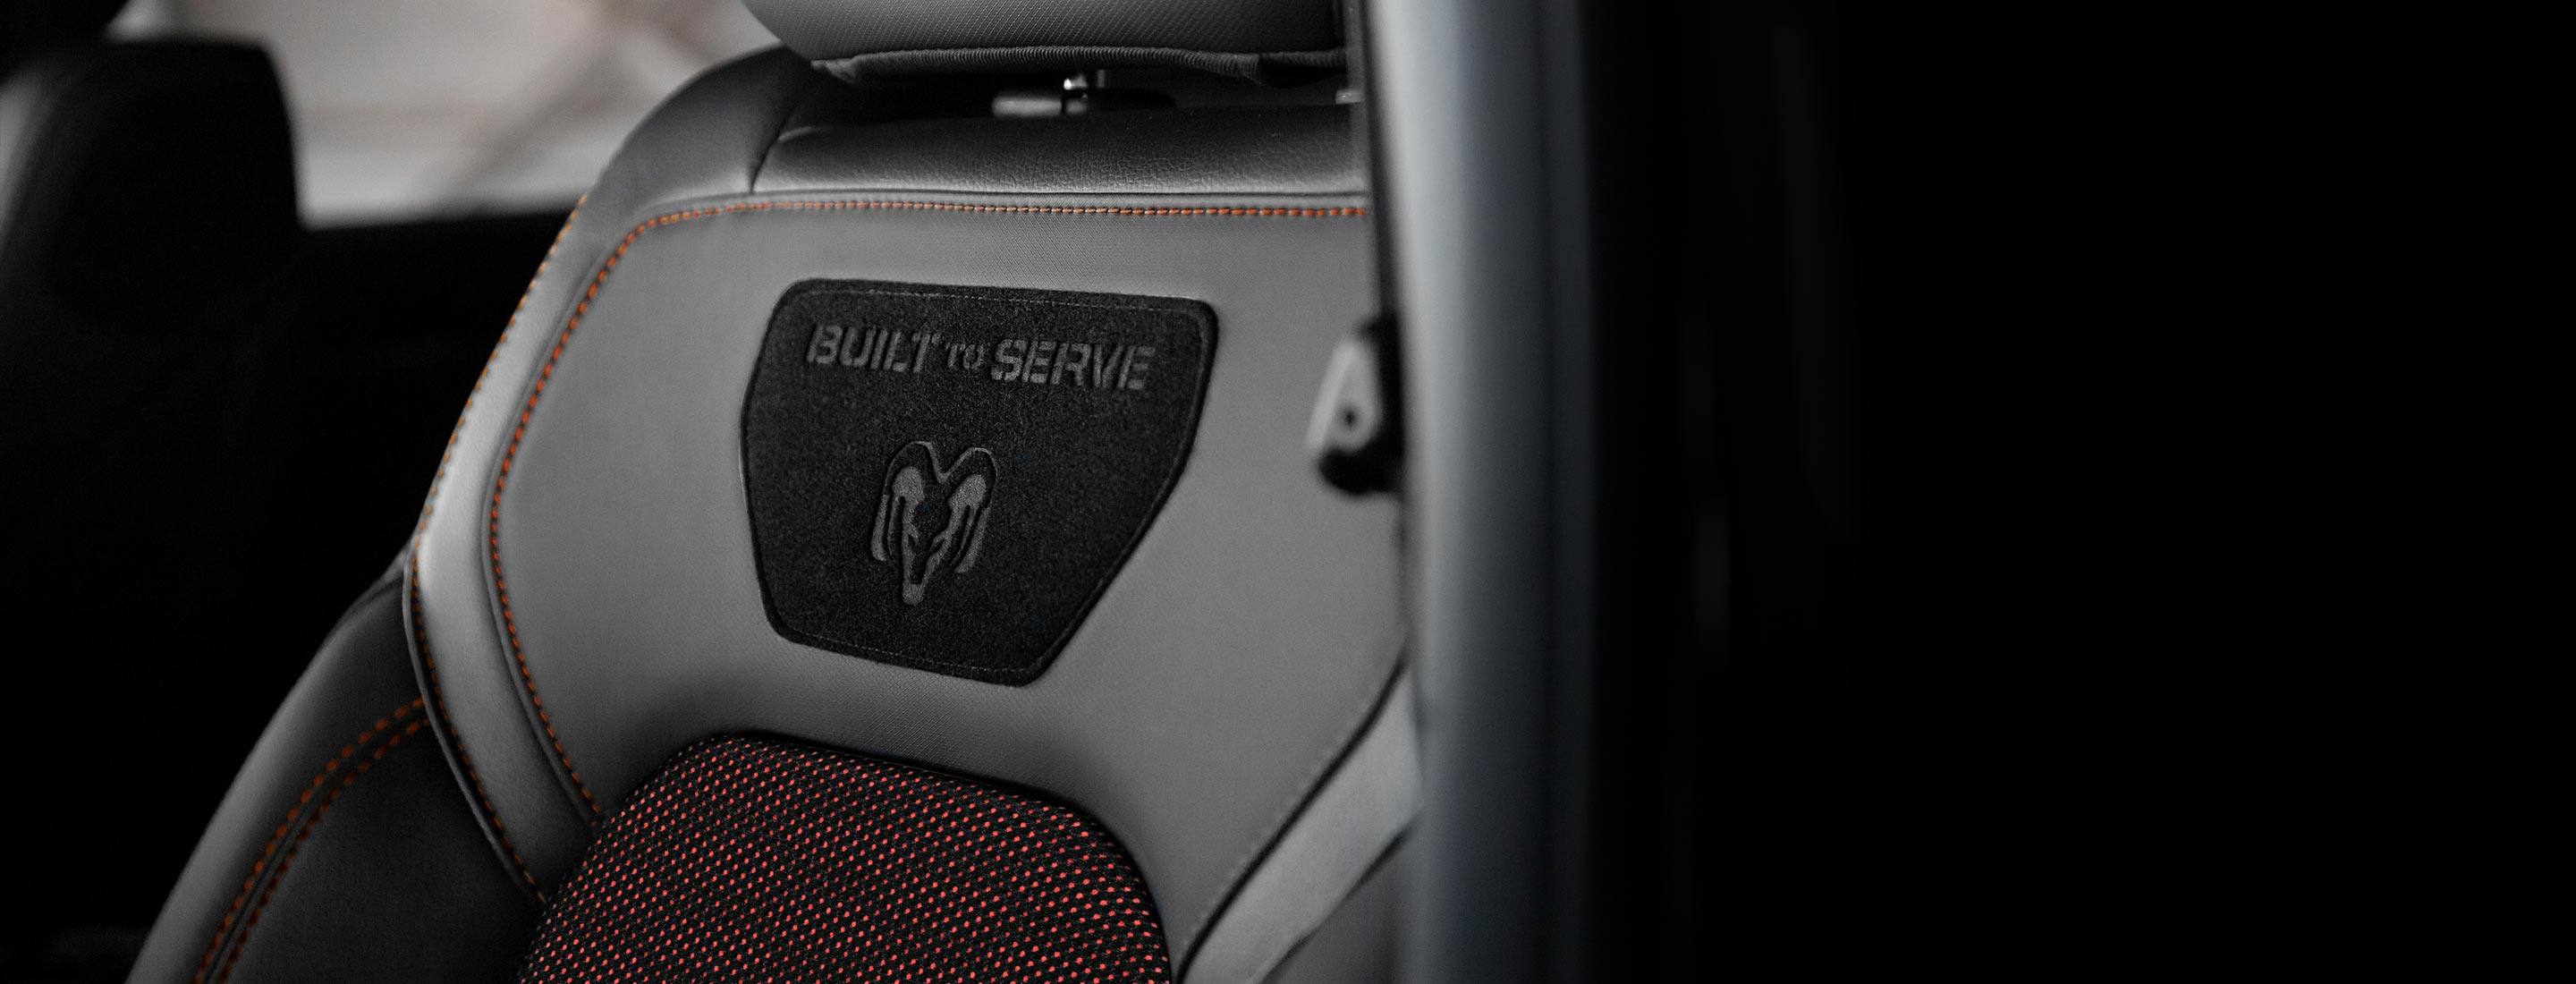 A close-up of the Ram's Head logo and Built to Serve logo on the seatback in the 2022 Ram 1500 Big Horn Built to Serve Edition.